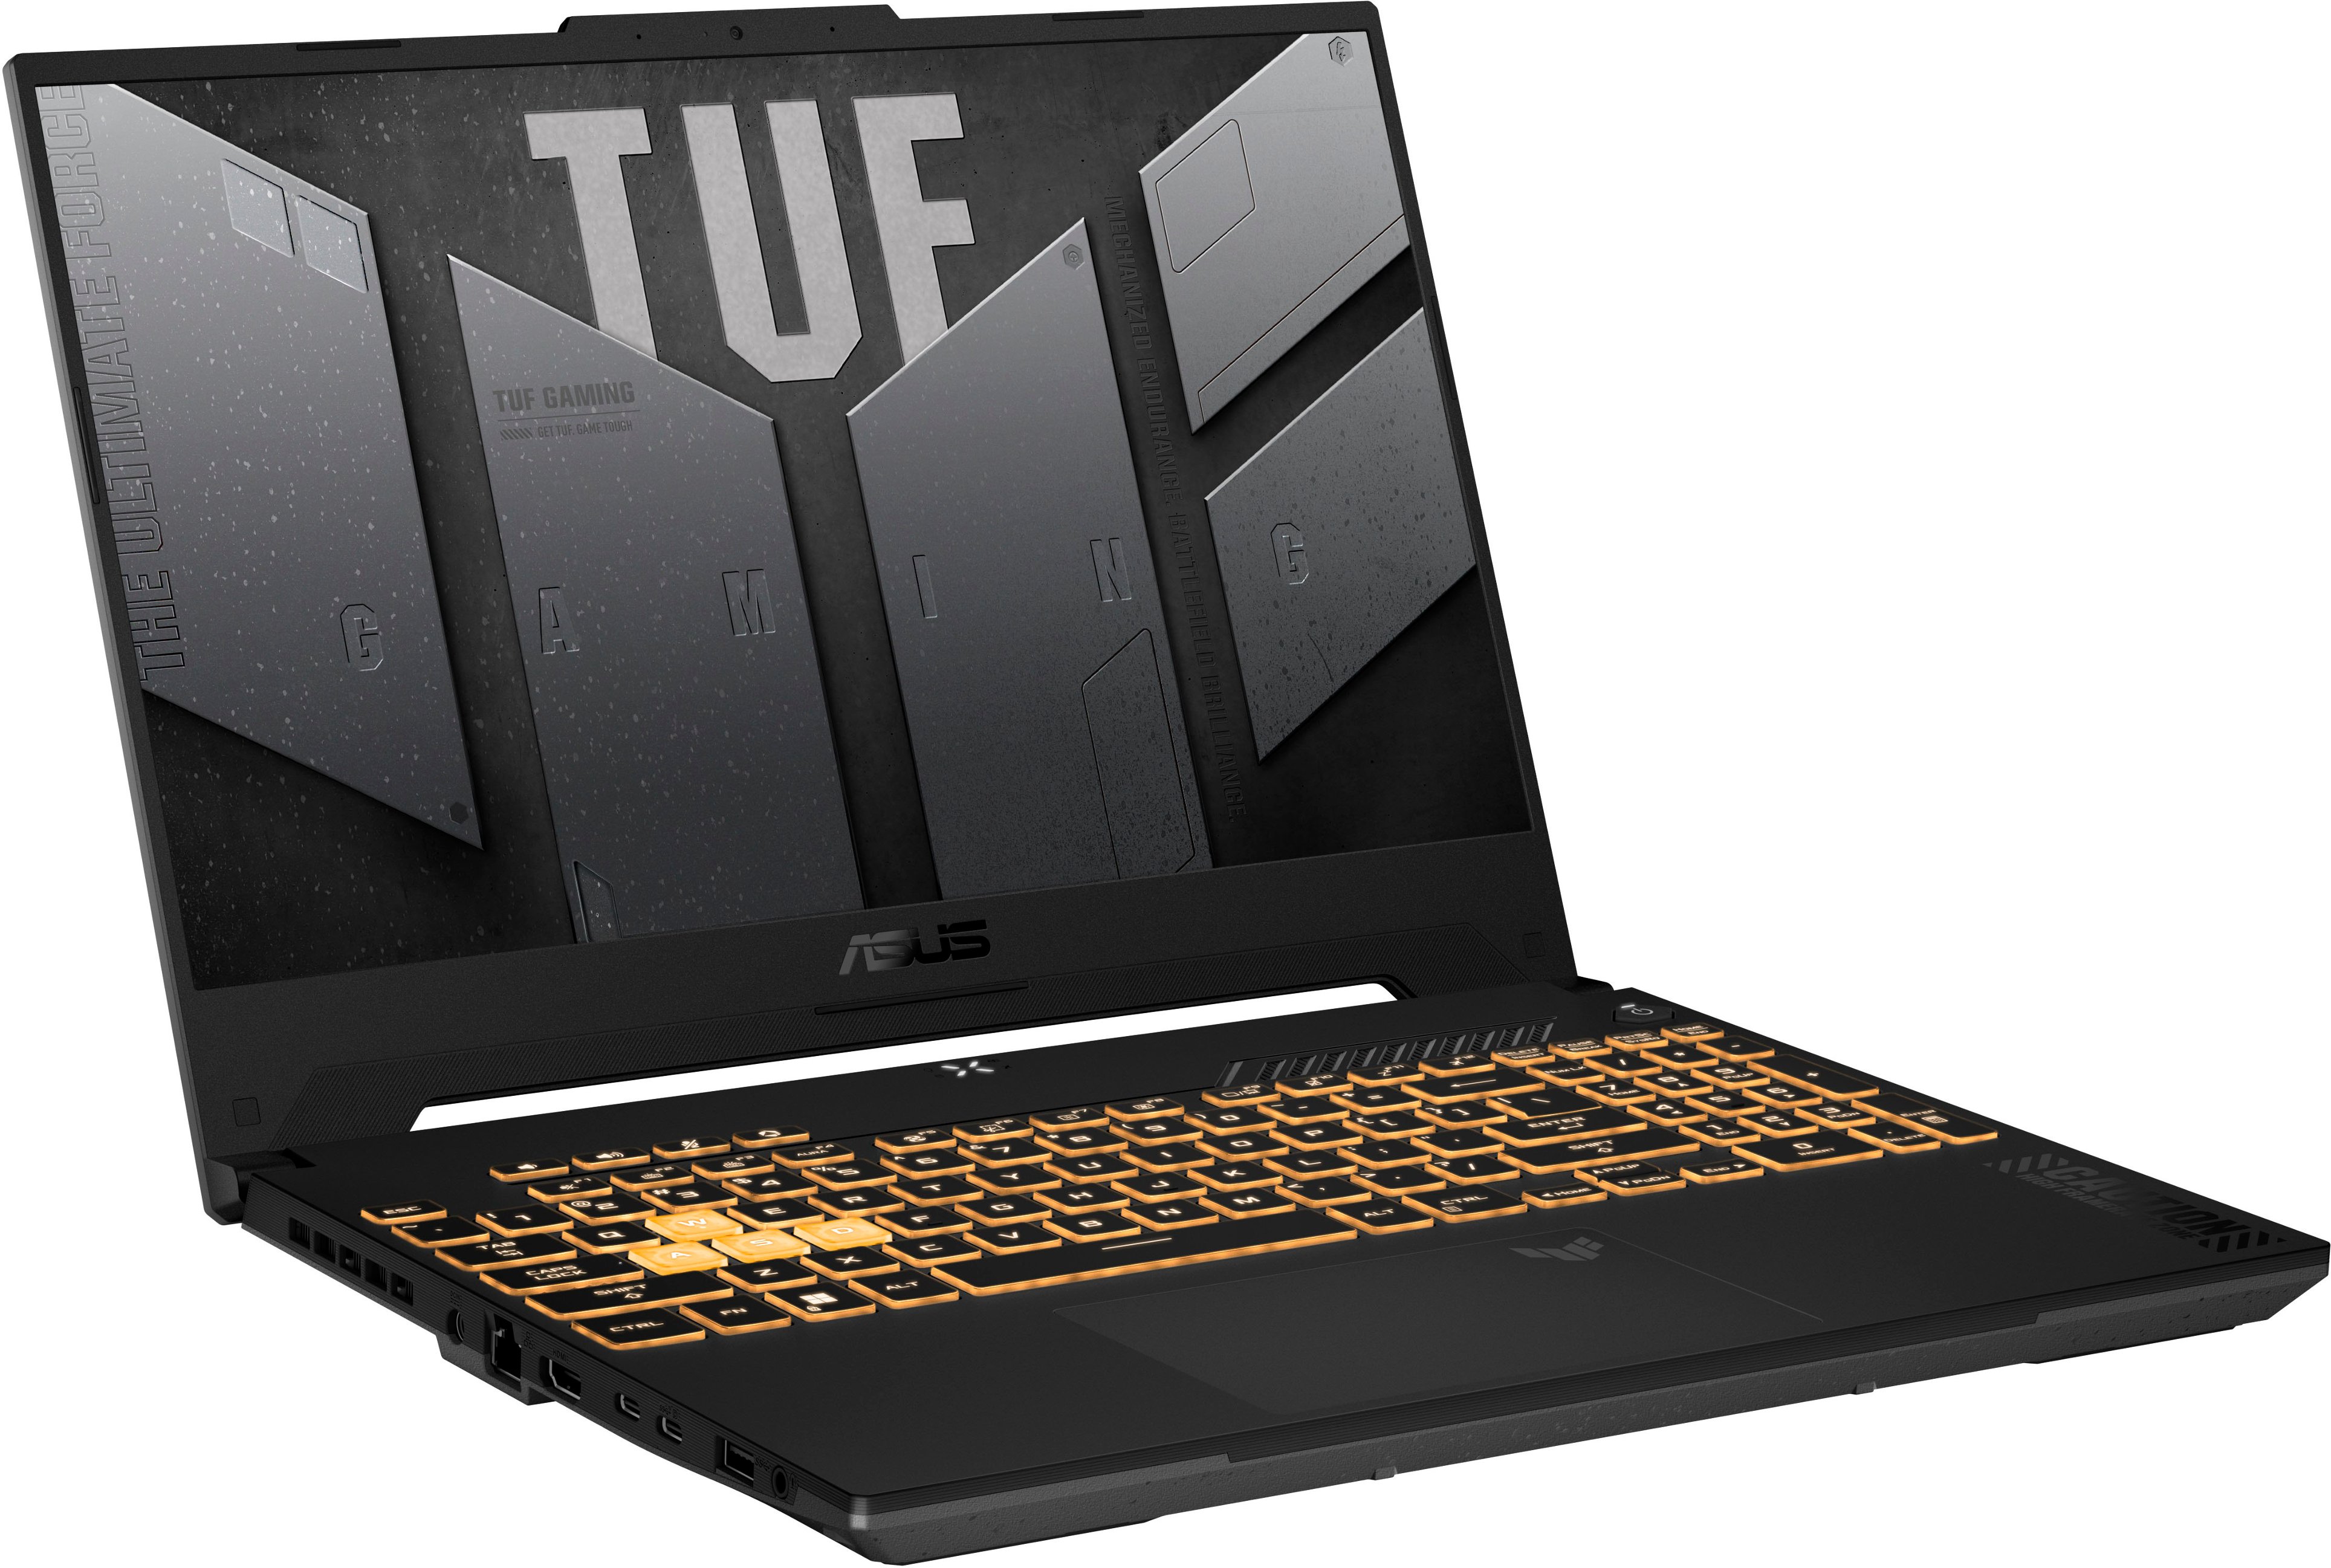 Angle View: ASUS - TUF 15.6" Gaming Laptop 144hz FHD - Intel Core i7 with 16GB Memory - NVIDIA GeForce RTX 4060 - 512GB SSD - Mecha Grey